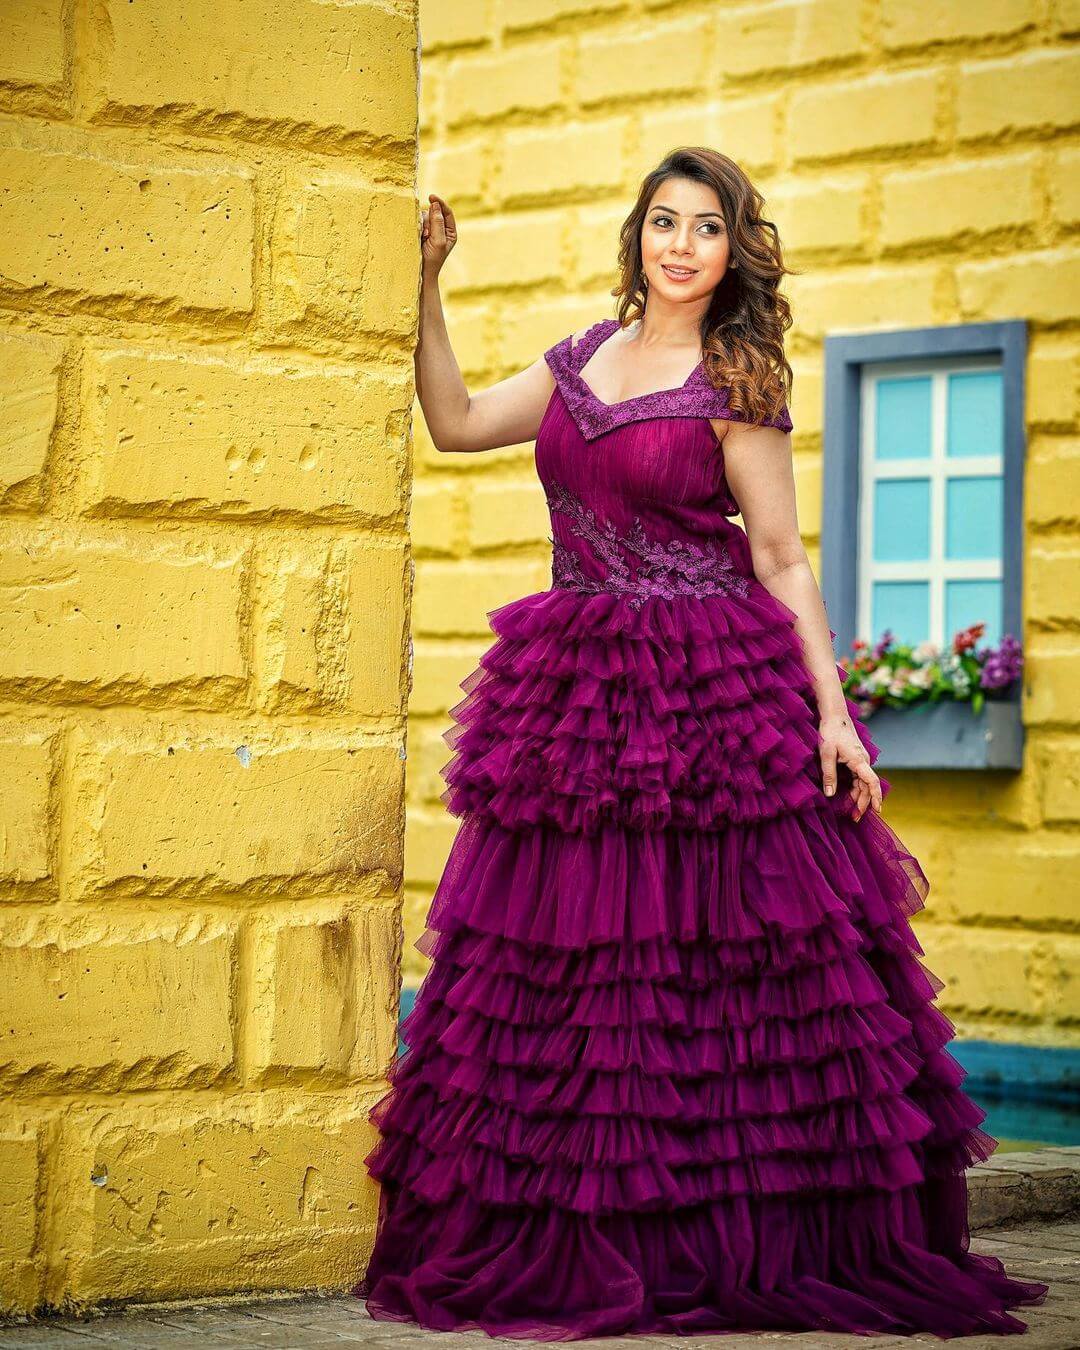 Sehrish Ali In Purple Ruffle Multi-Layer Gown Outfit